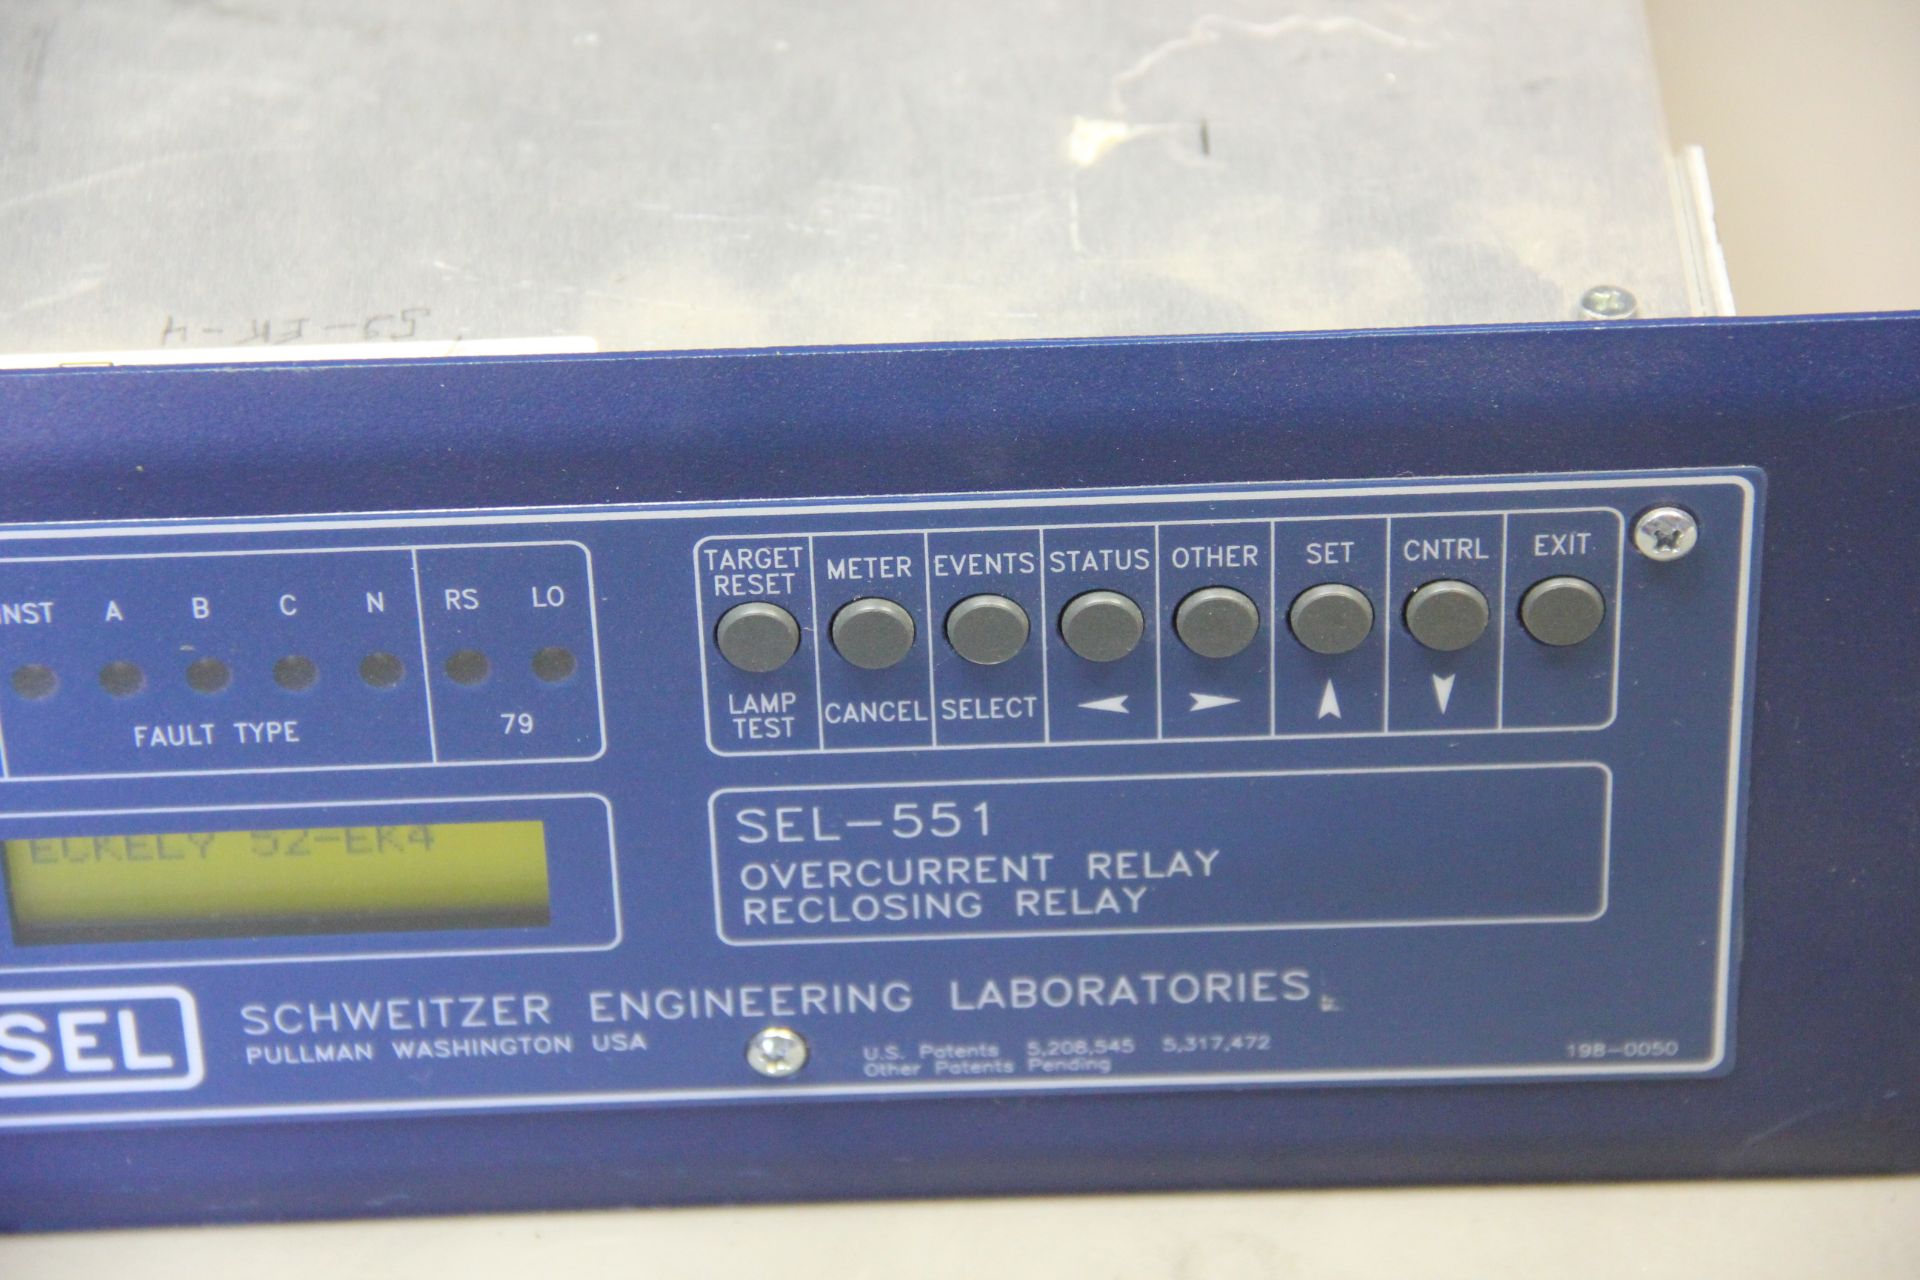 SEL OVERCURRENT RELAY/RECLOSING RELAY - Image 5 of 7